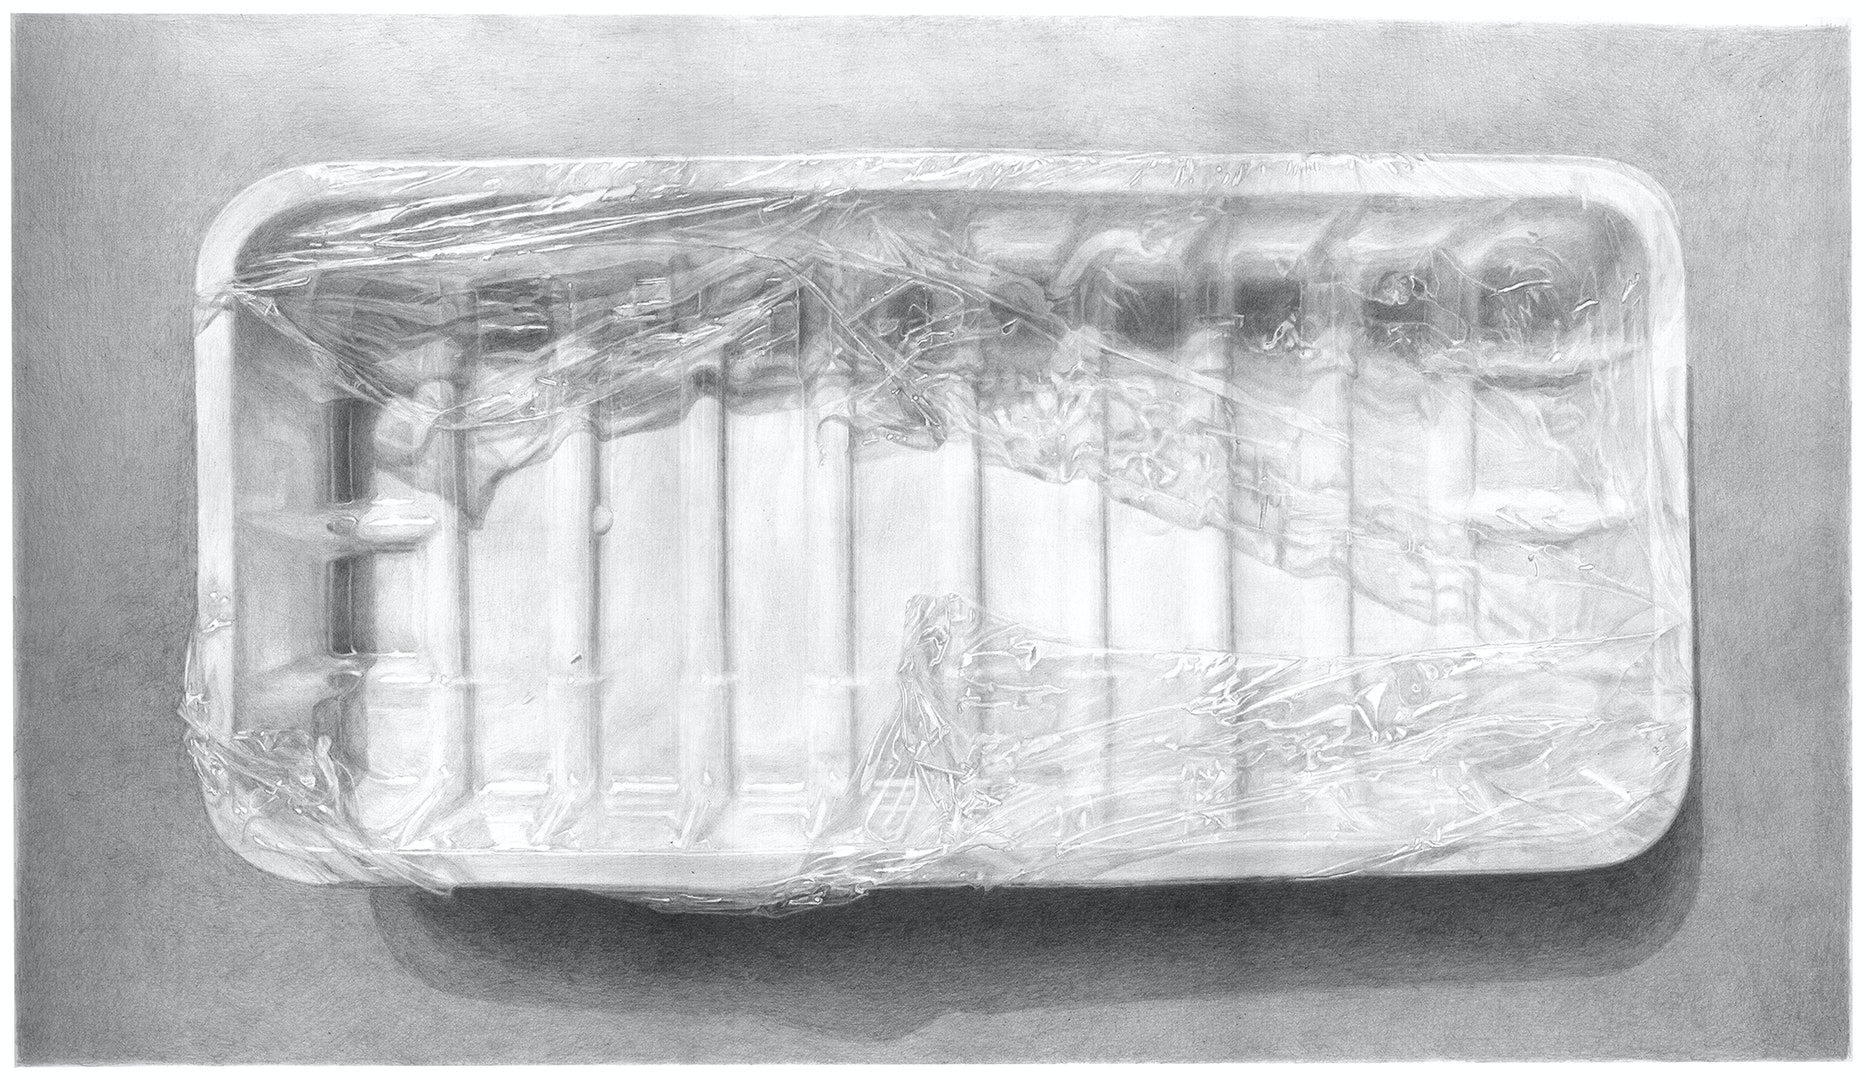 'Plastic tray with plastic wrap – Meatless 4', Ilana Dotan, Pencil drawing on paper, 40 x 70 cm